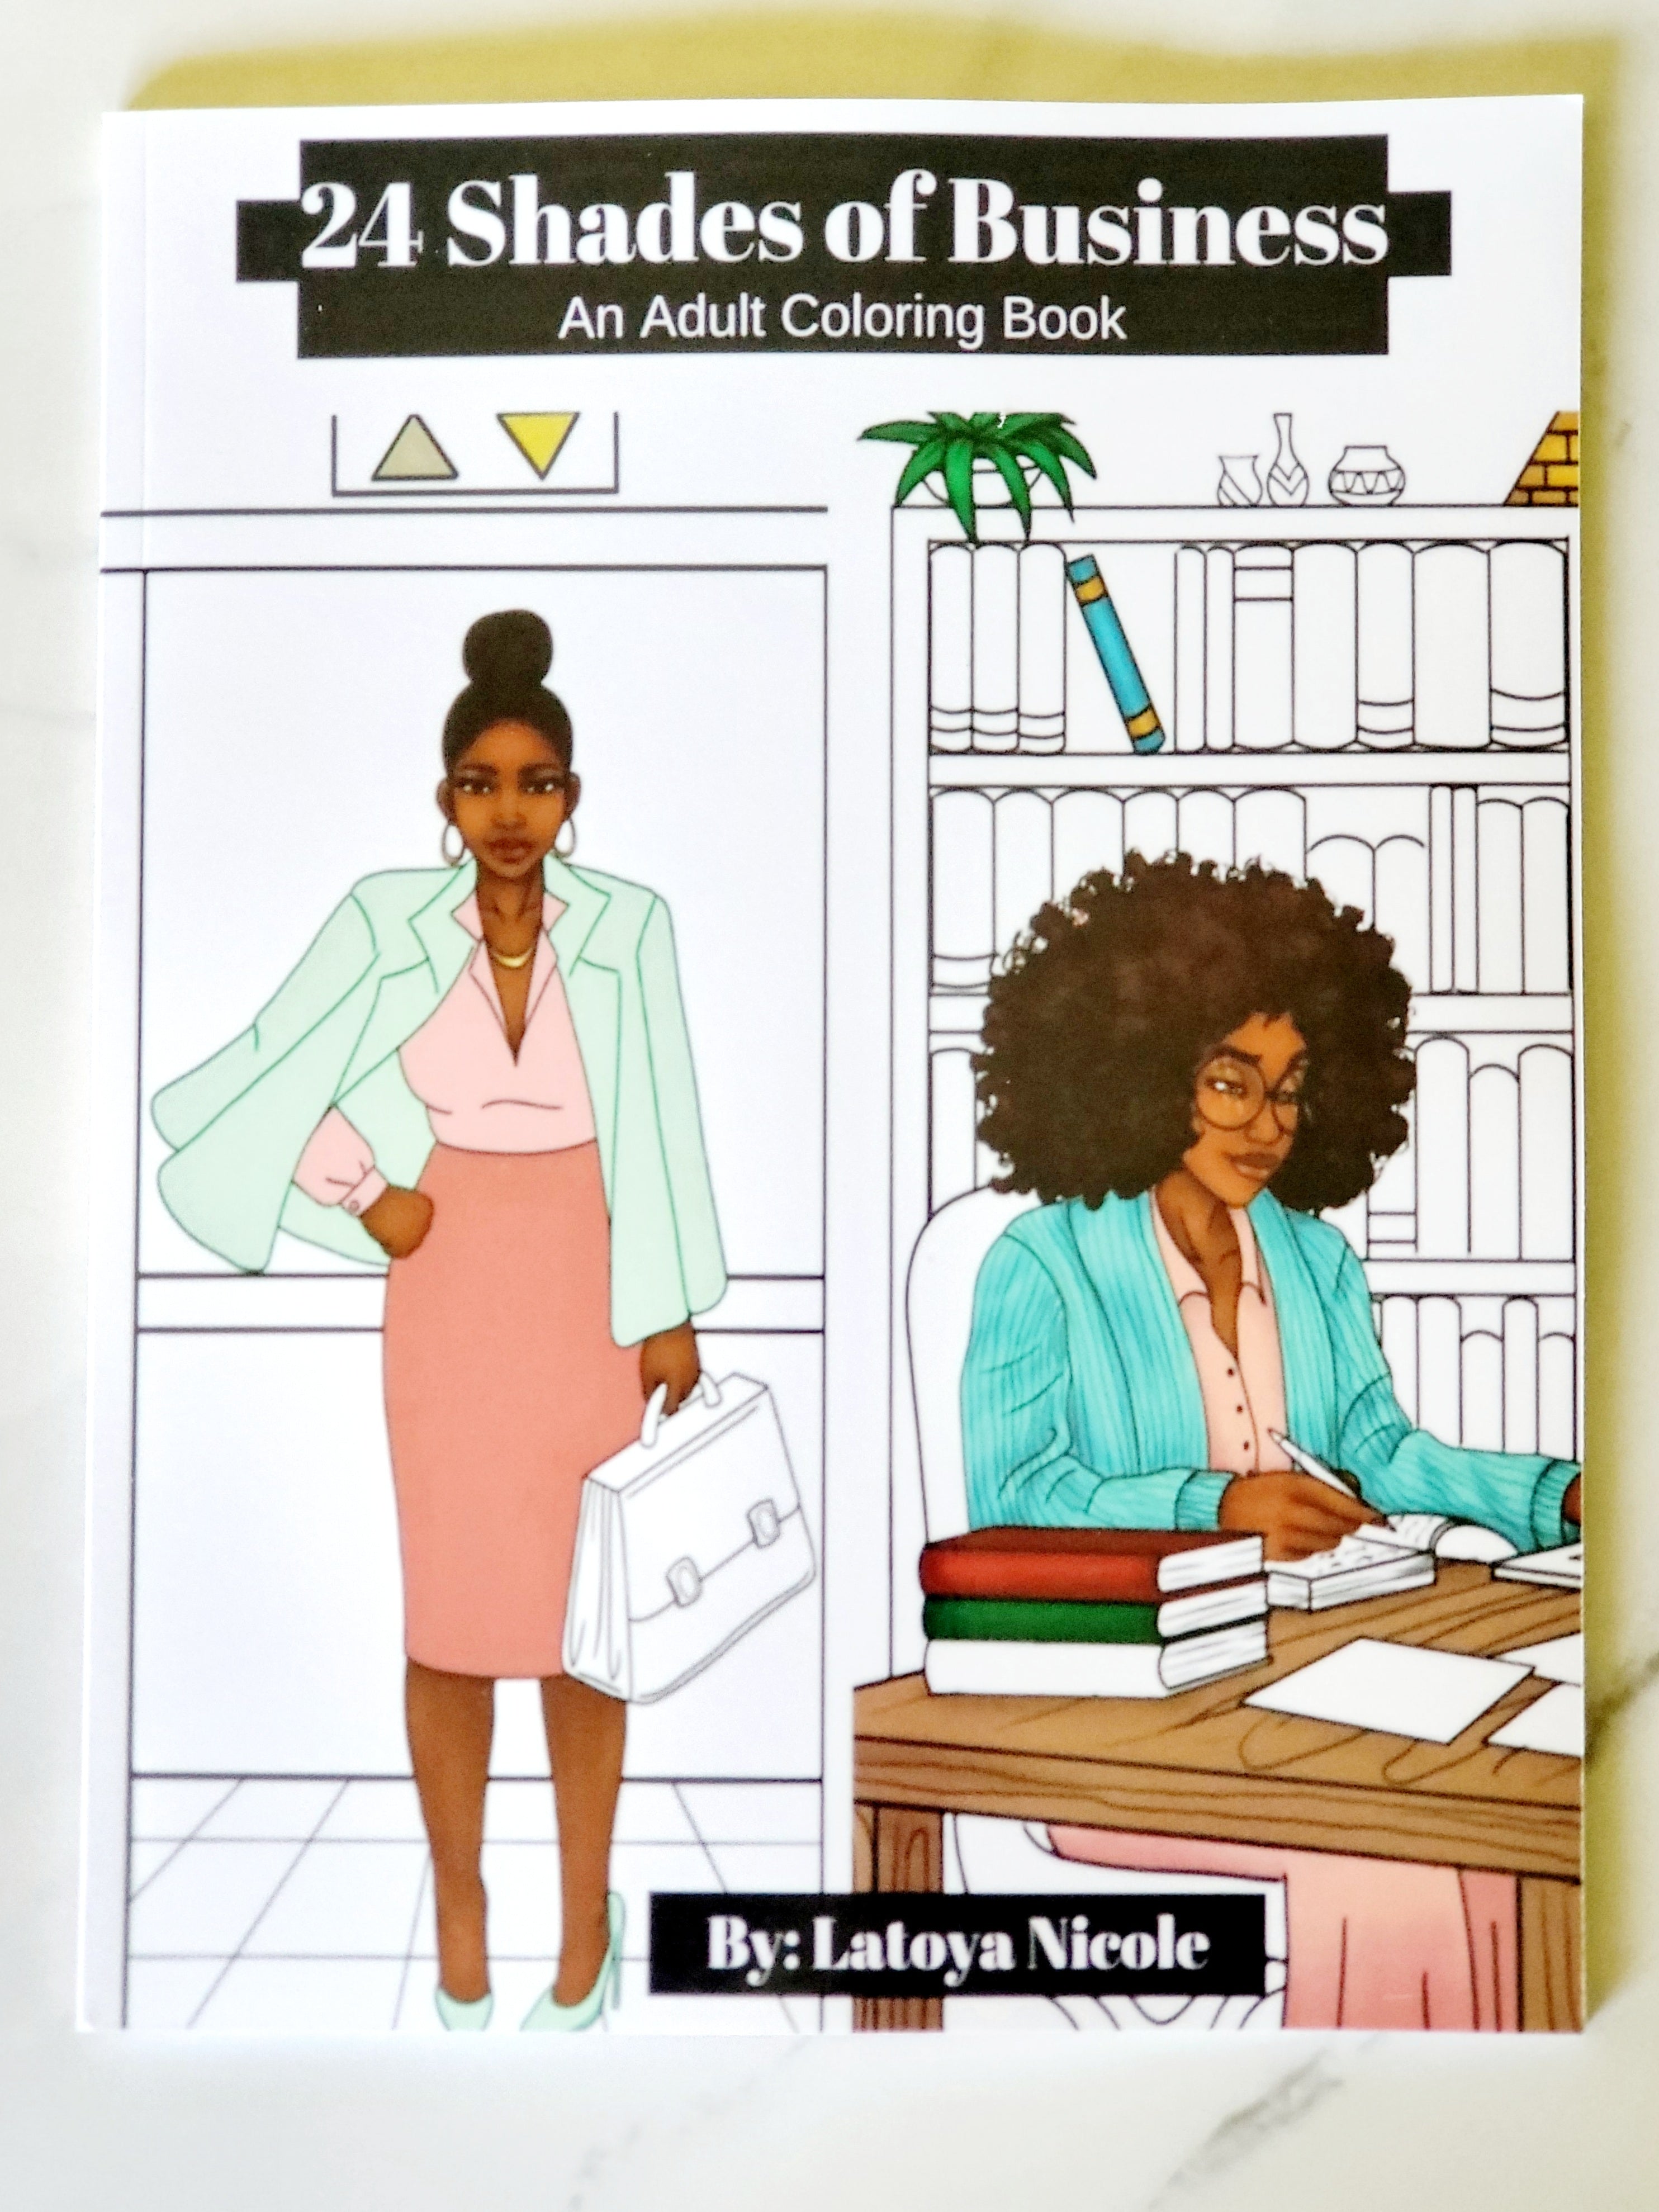 24 Shades of Business: An Adult Coloring Book